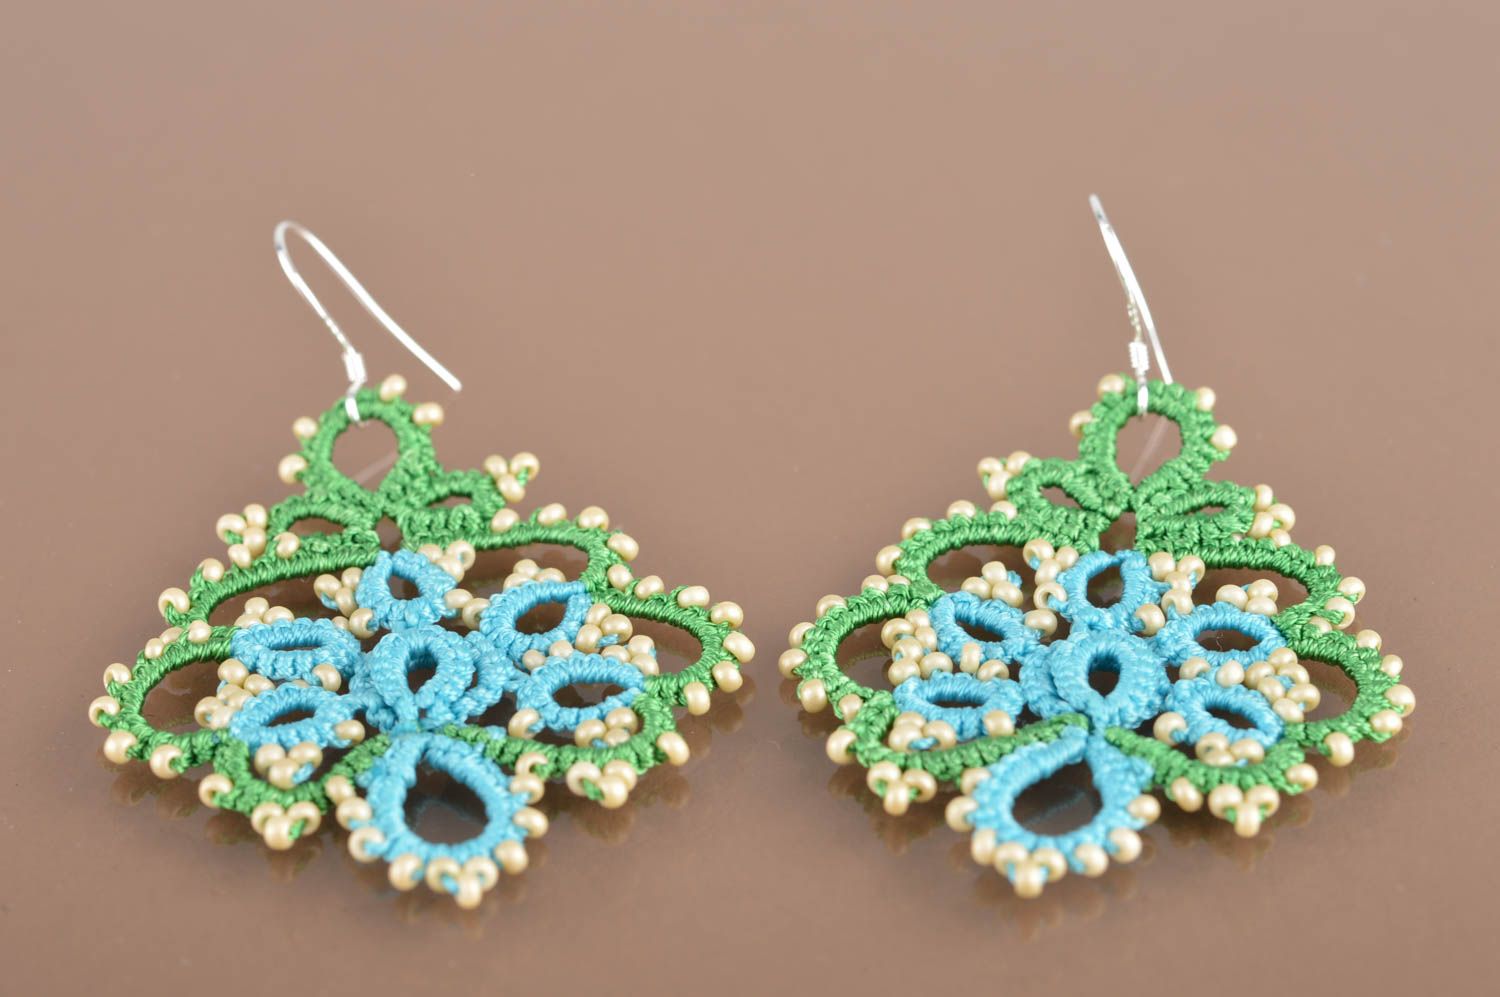 Handmade large lace drop tatted earrings woven of green and blue satin threads photo 5